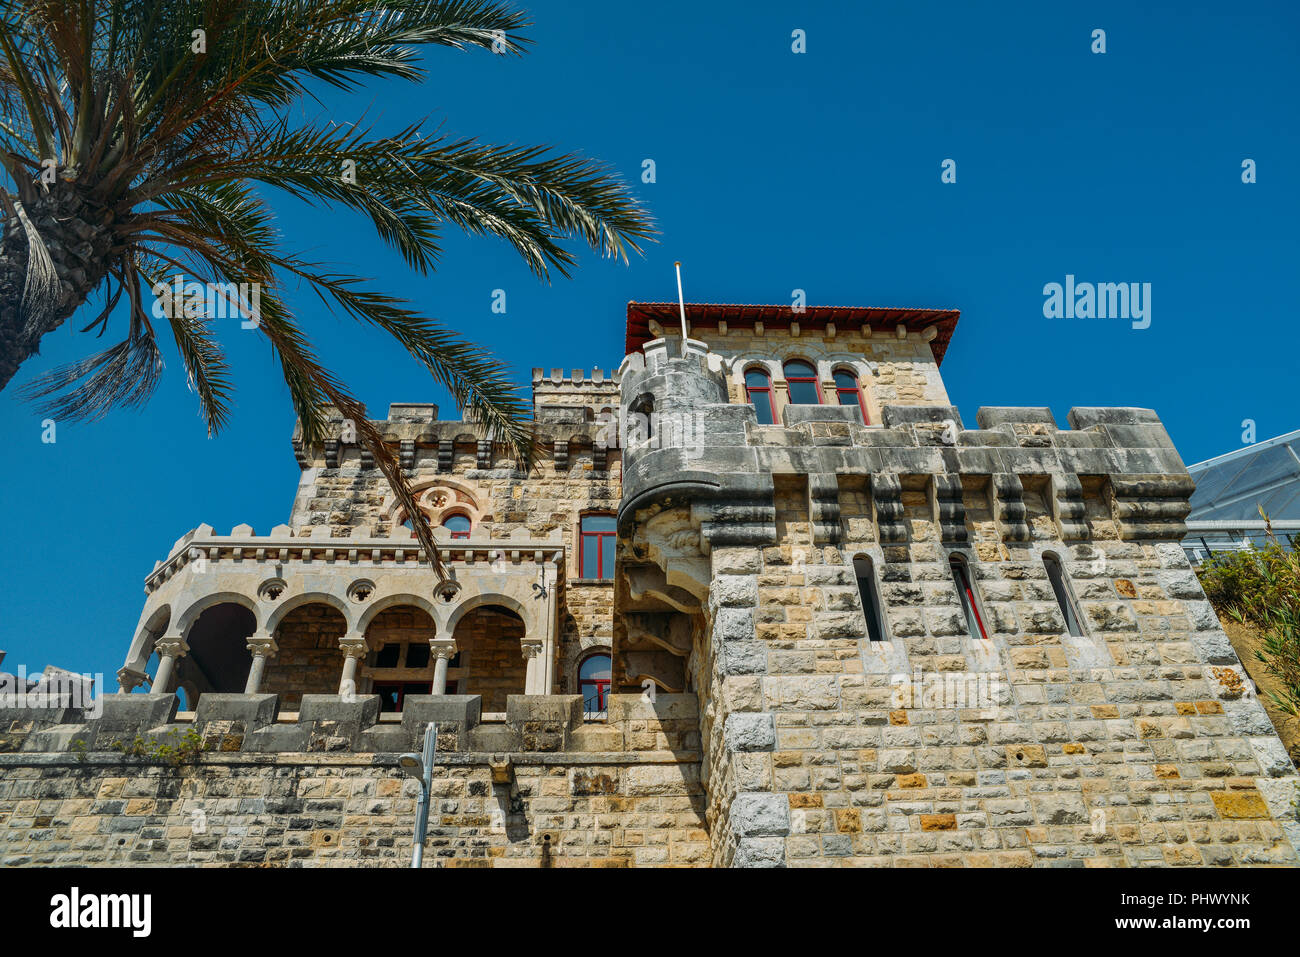 Estoril, Portugal - August 30th, 2018: Estoril on Lisbon's Sunshine coast - Historical fortified Baronial mansion overlooking the beach Stock Photo